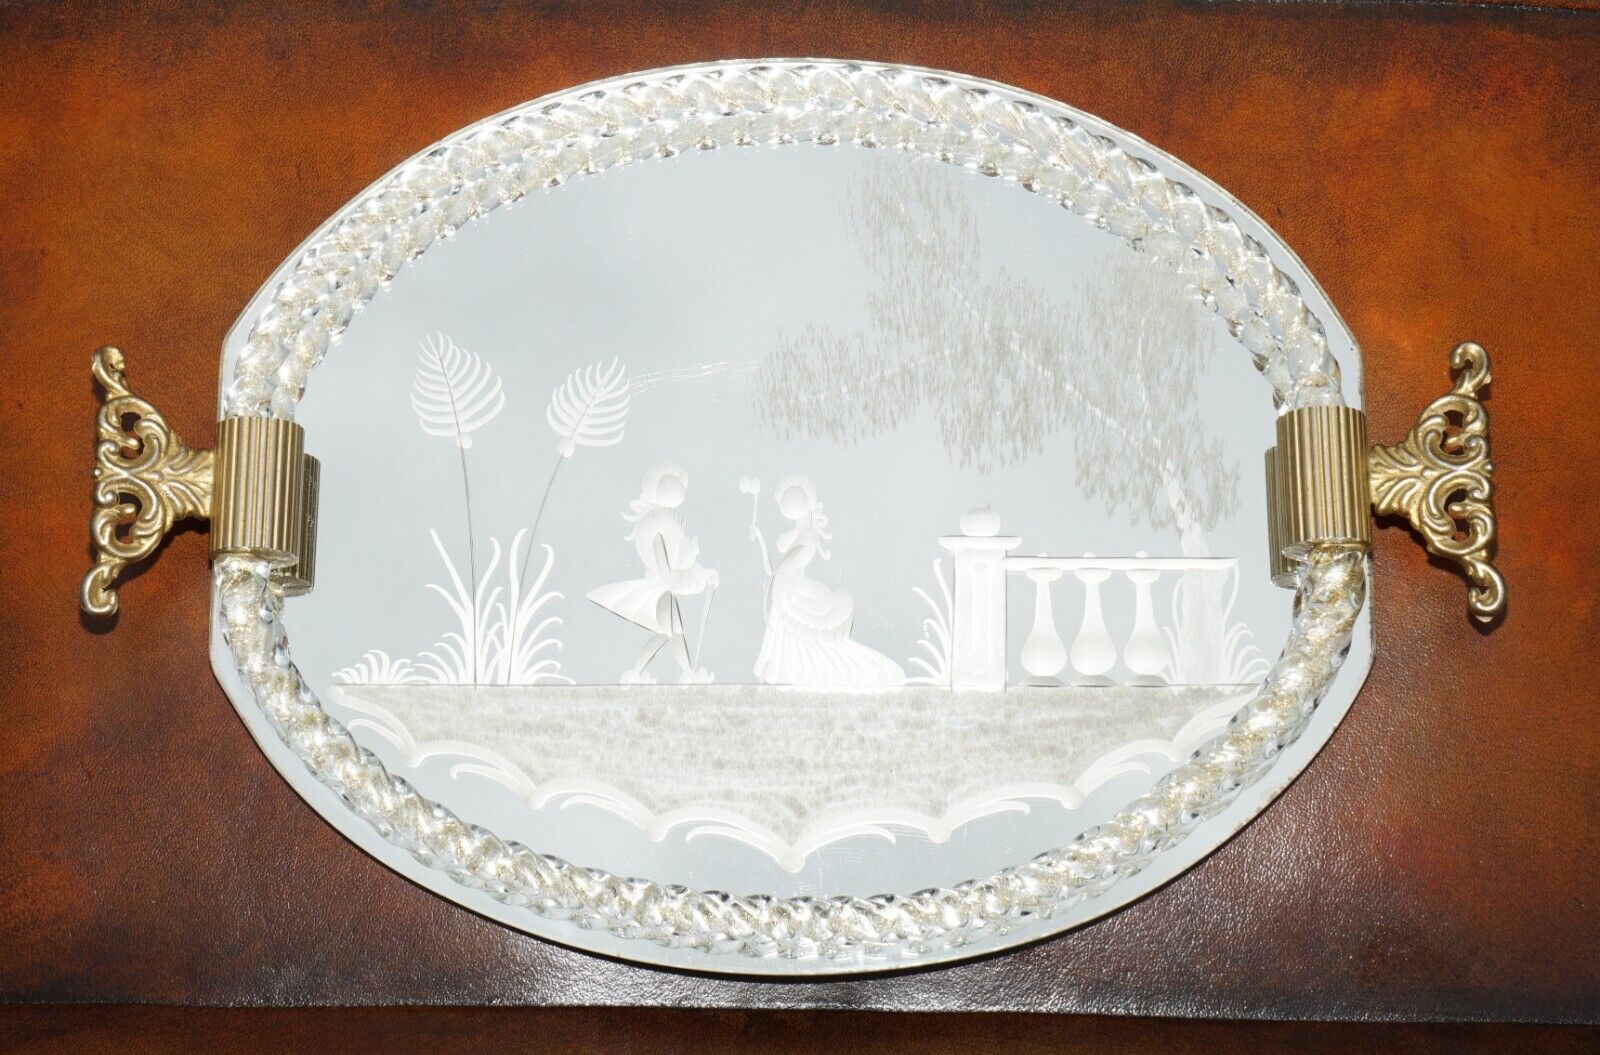 EXQUISITE HAND MADE IN ITALY POUR LE BAIN MURANO GLASS VENETIAN ETCHED TRAY